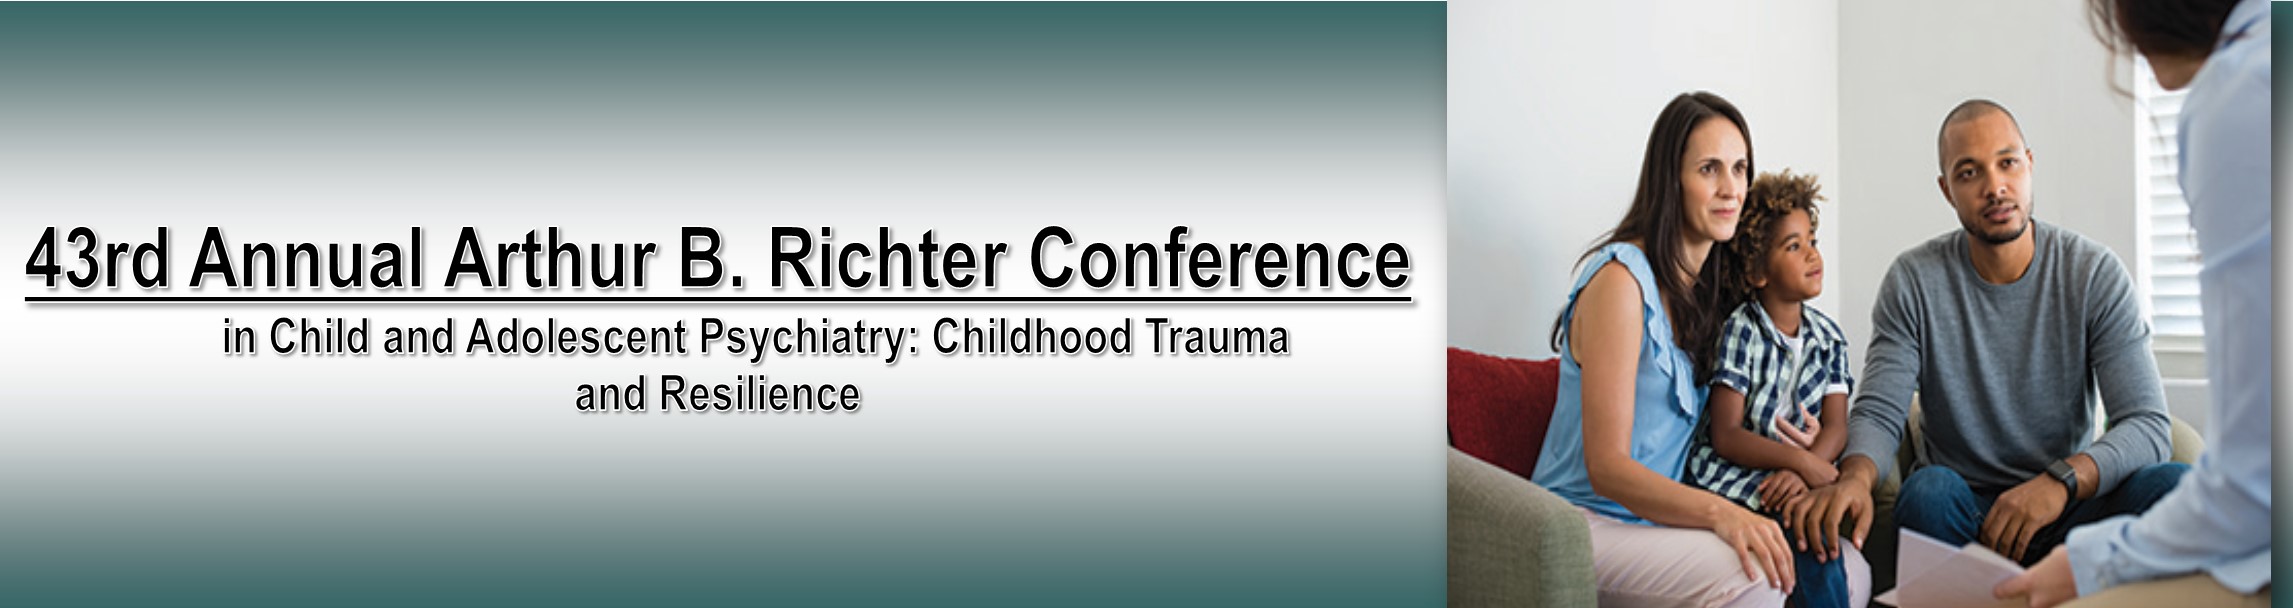 43rd Annual Arthur B. Richter Conference in Child and Adolescent Psychiatry: Childhood Trauma and Resilience Banner